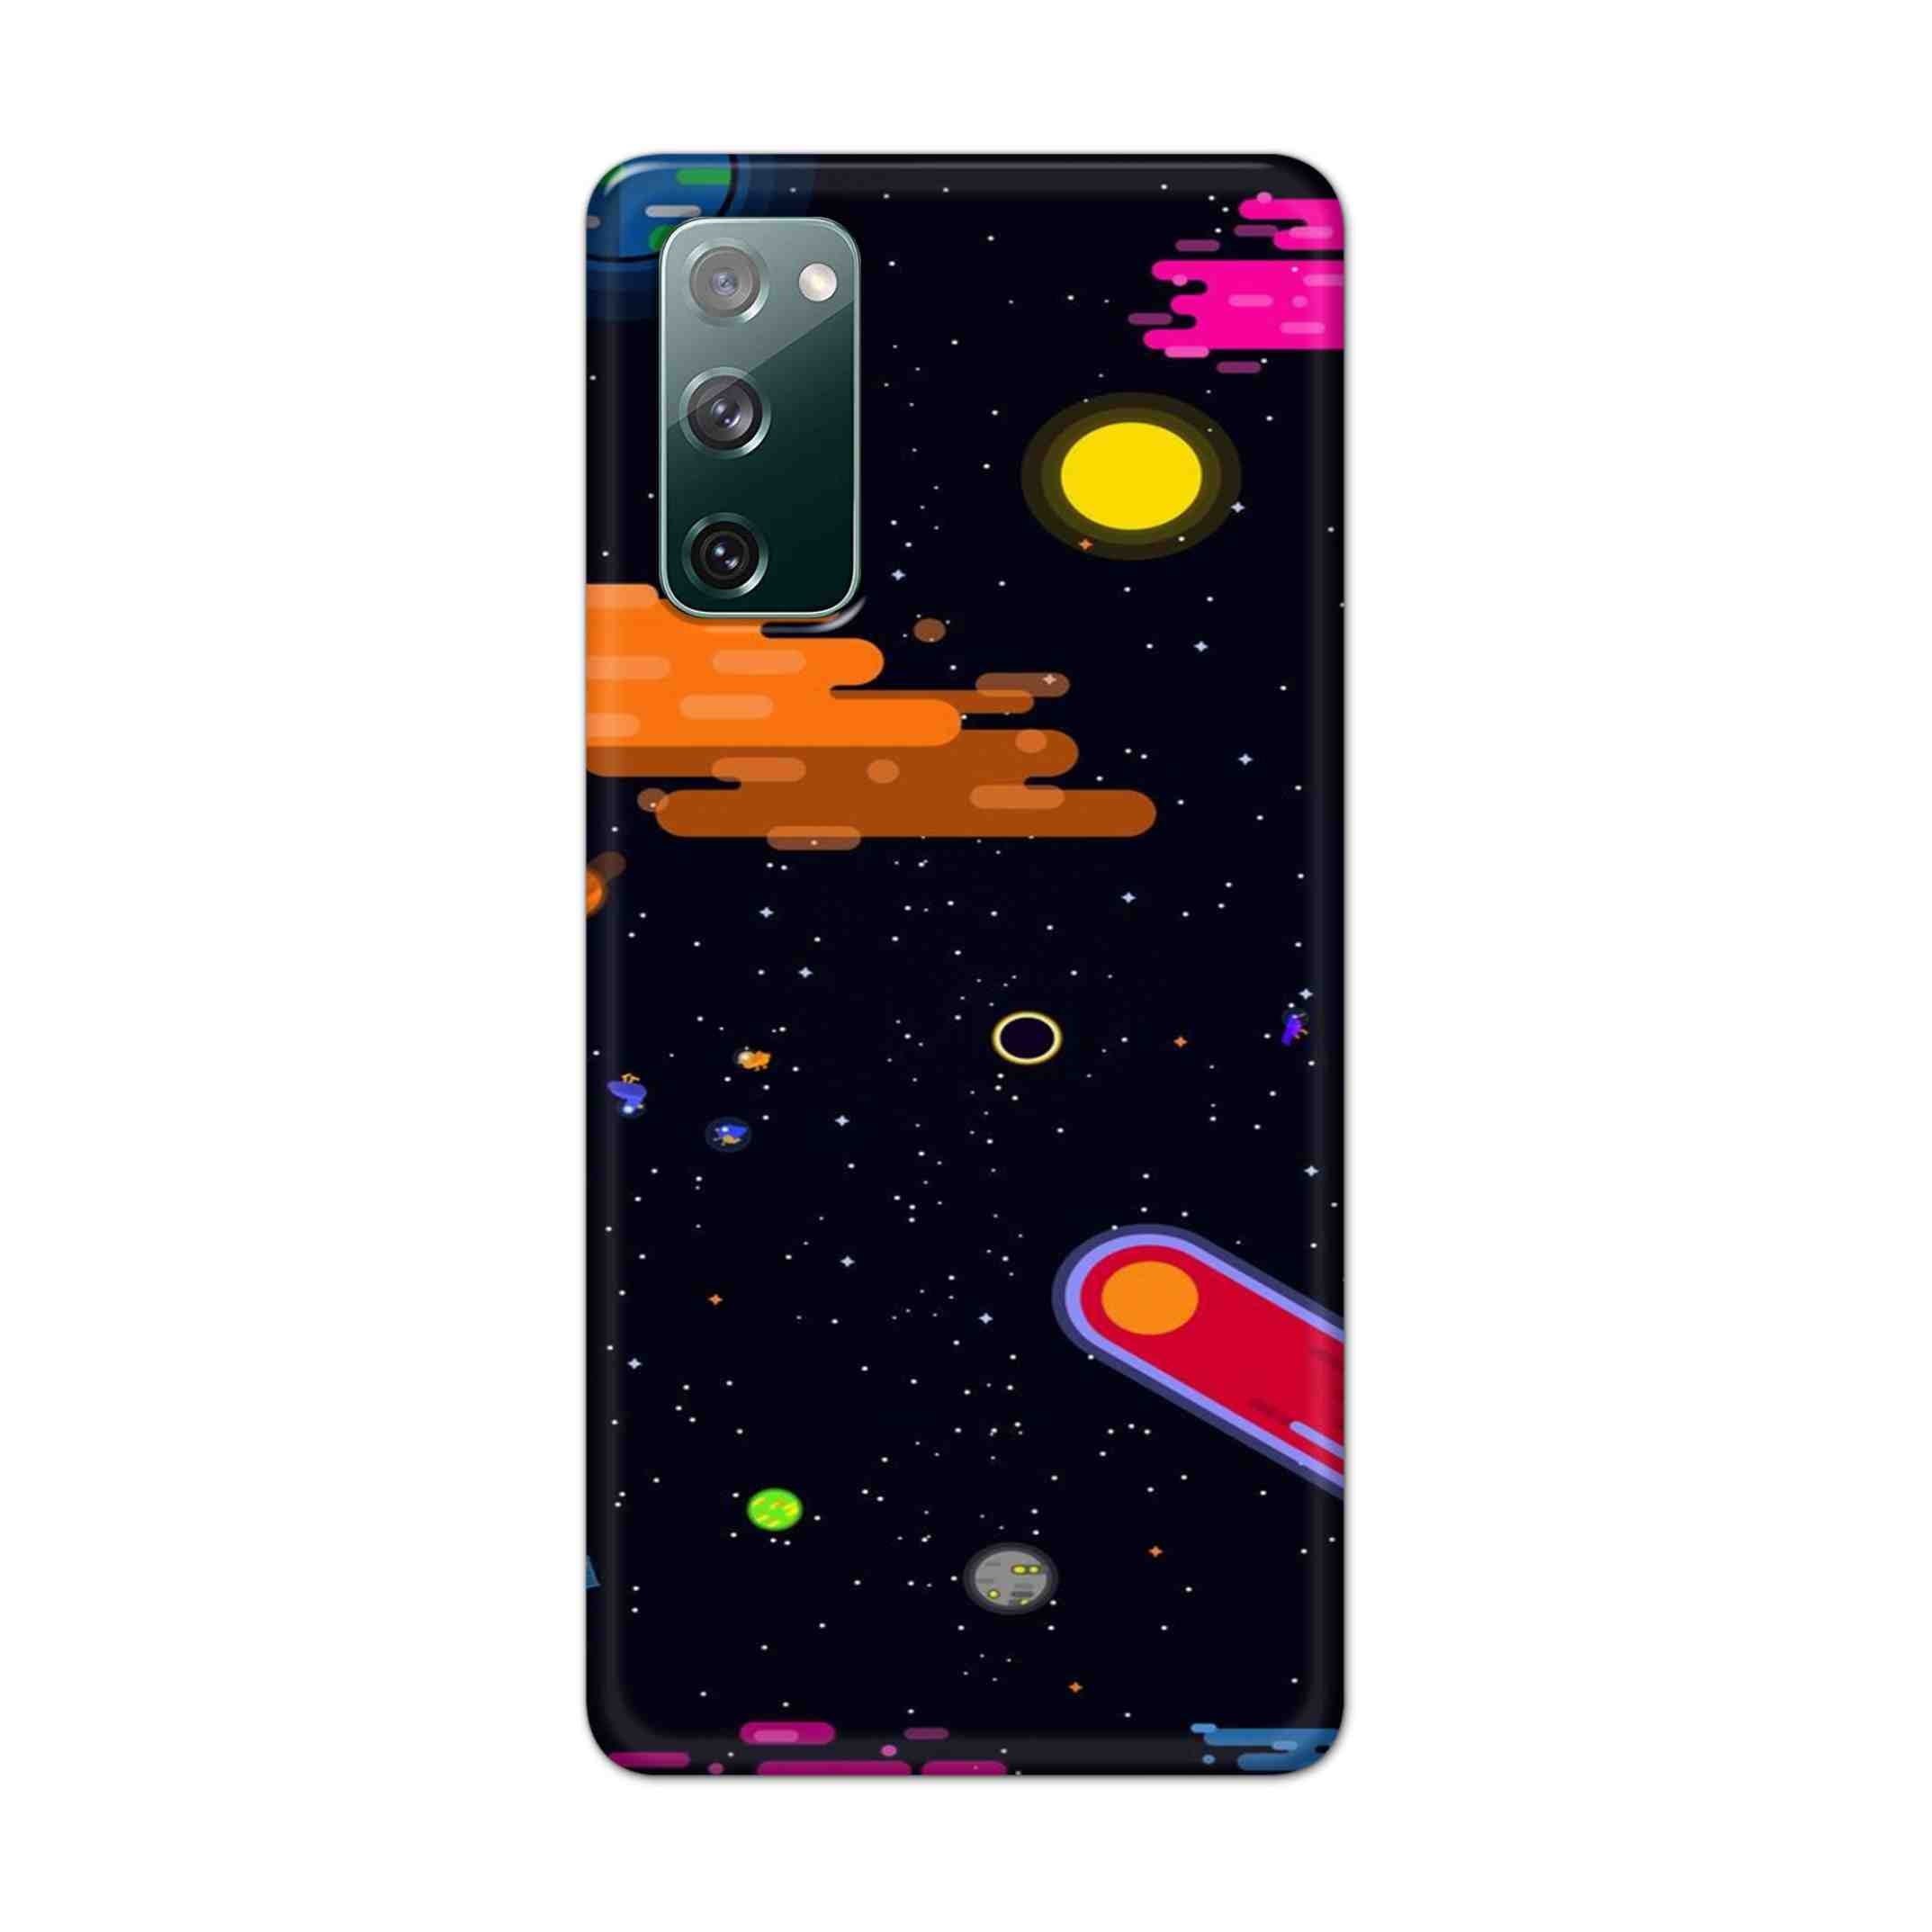 Buy Art Space Hard Back Mobile Phone Case Cover For Samsung Galaxy S20 FE Online